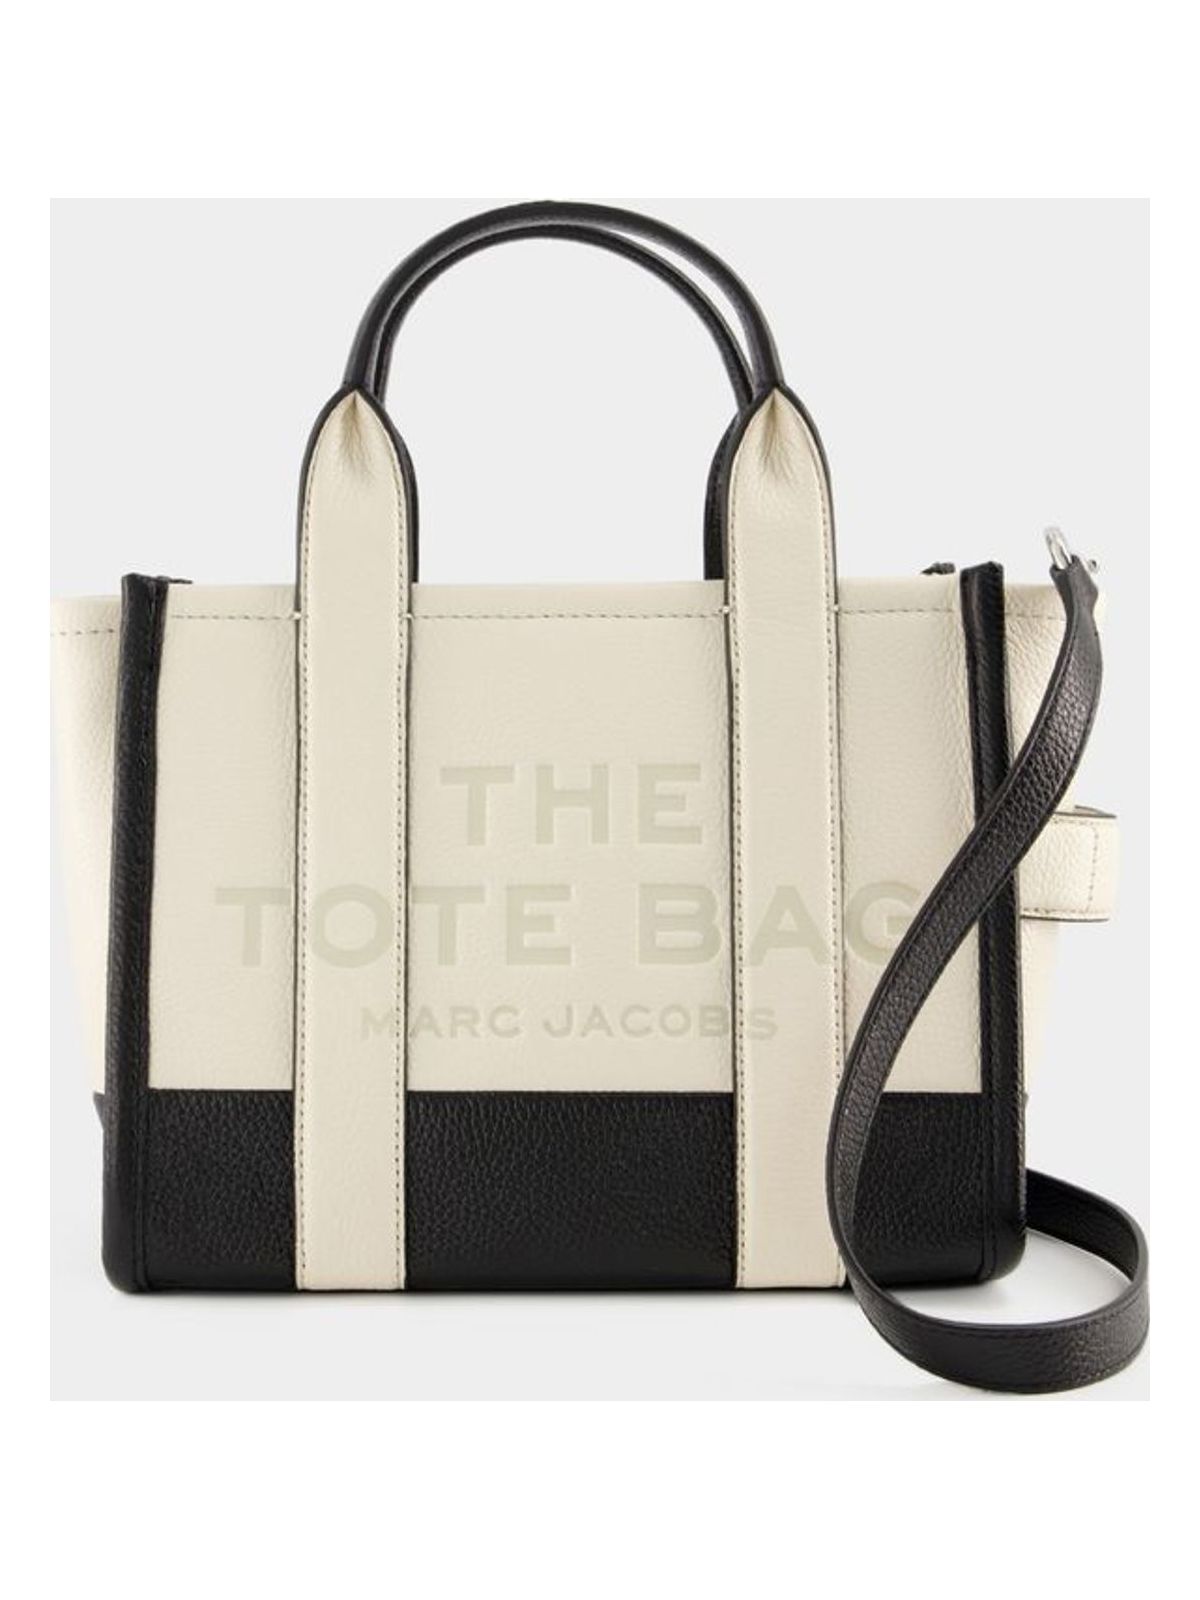 112 MARC JACOBS THE TOTE BAG